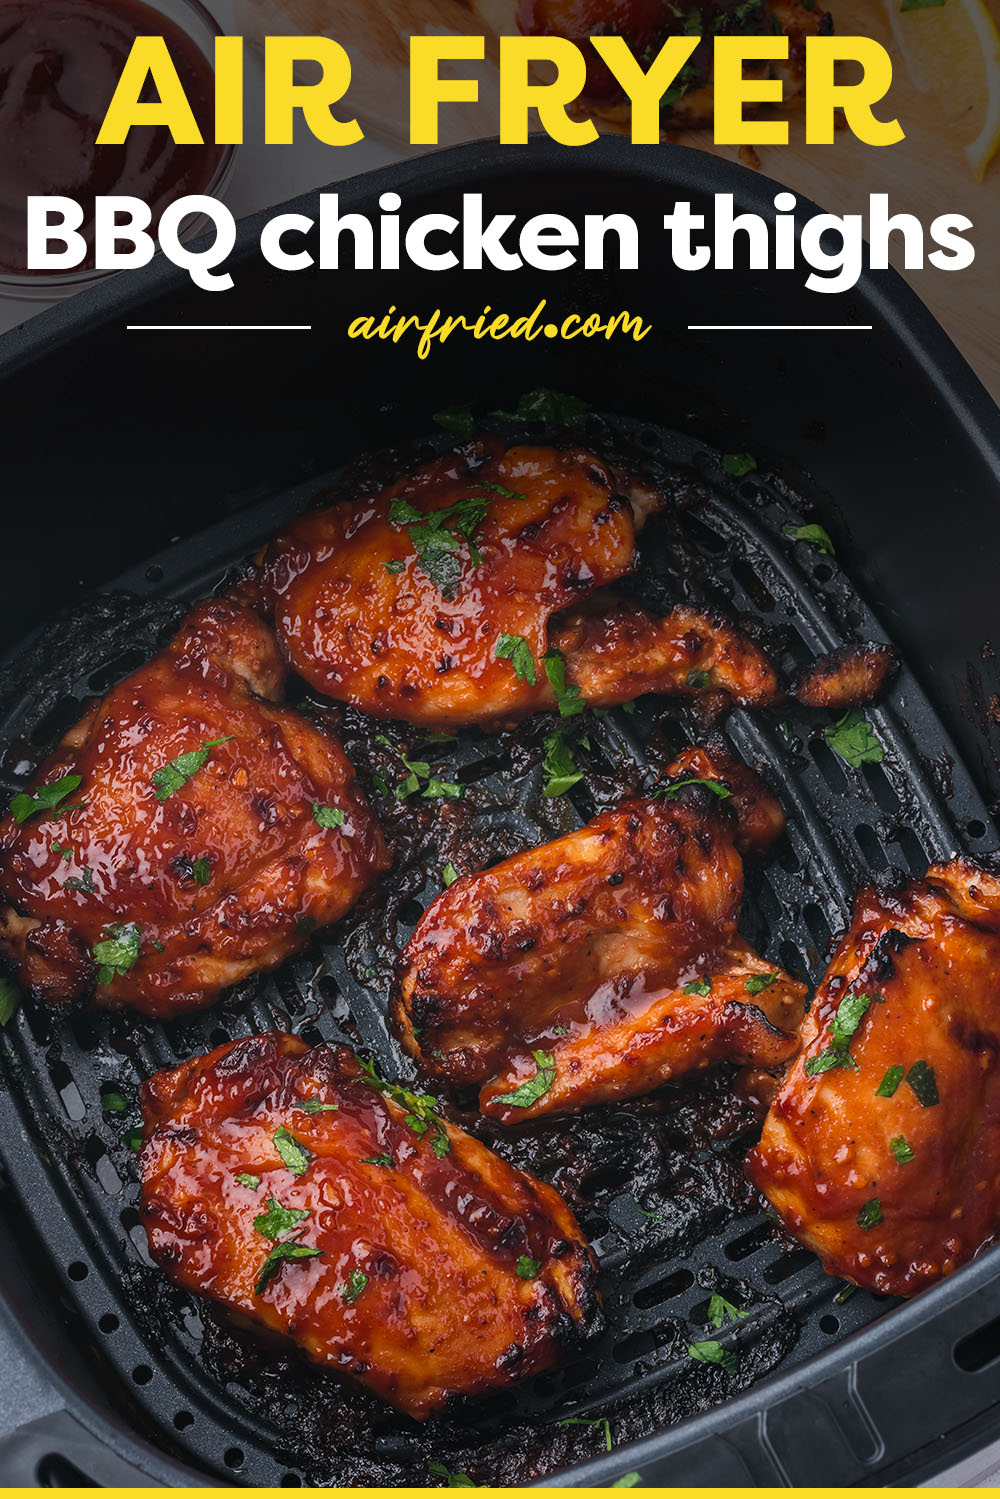 These BBQ chicken thighs are air fried to keep them juicy, flavorful, and super easy to clean up!